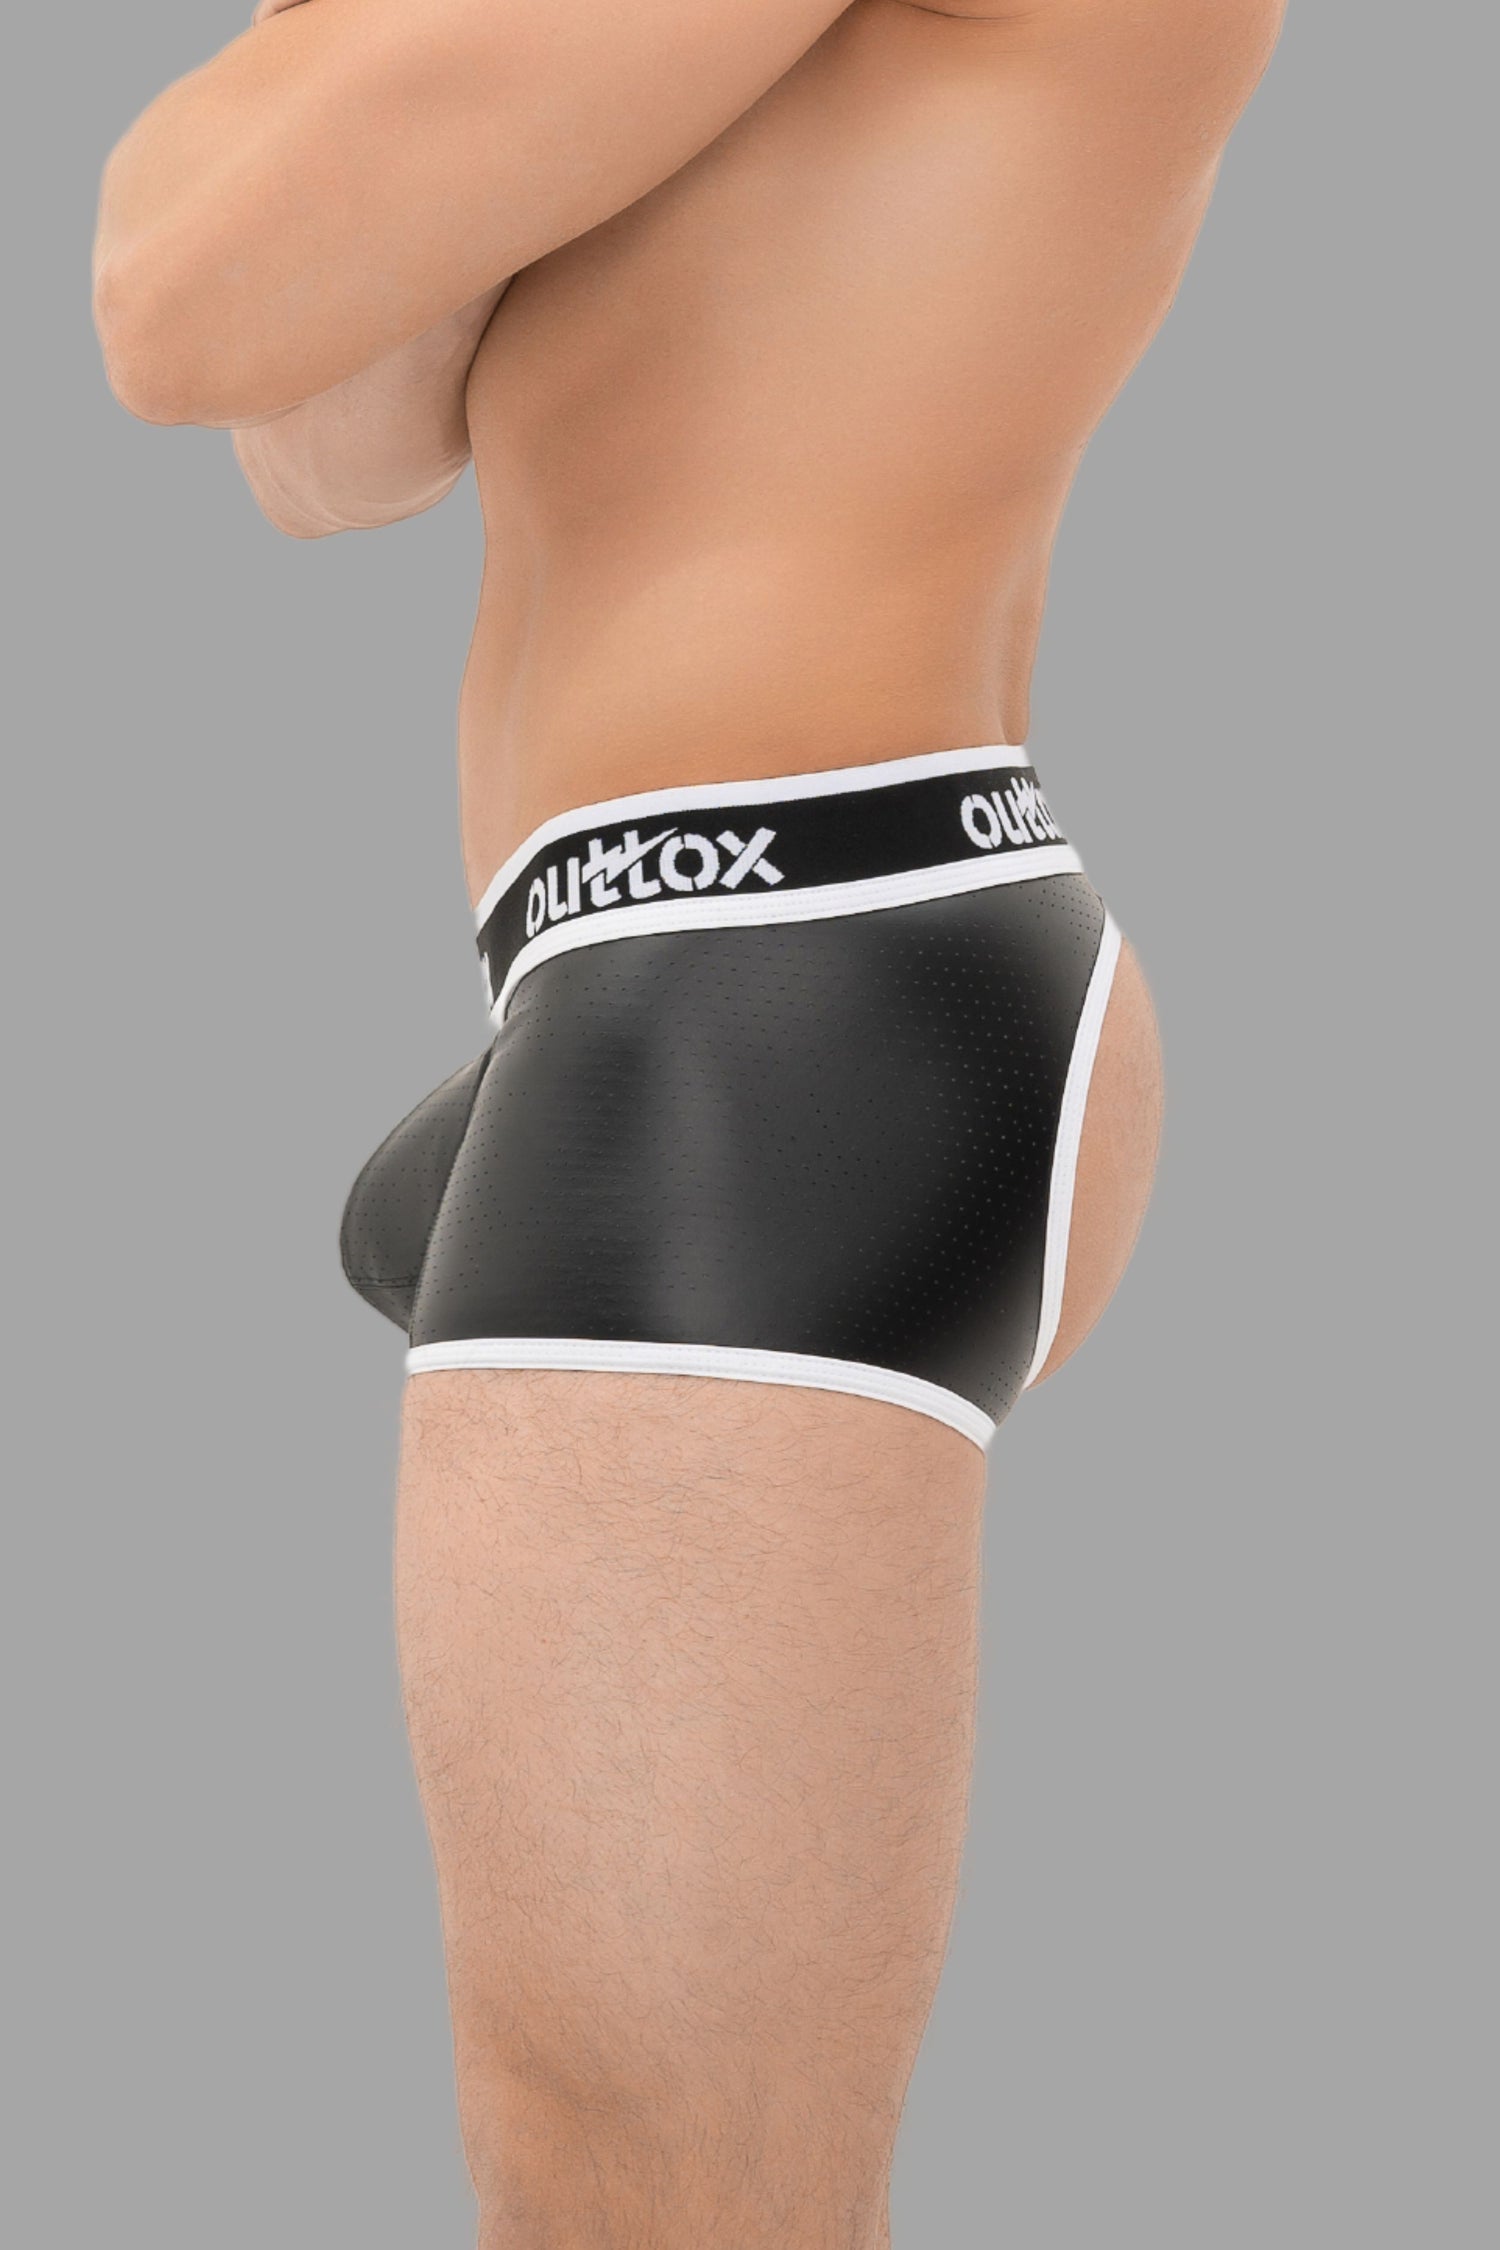 Outtox. Open Rear Trunk Shorts with Snap Codpiece. Black+White